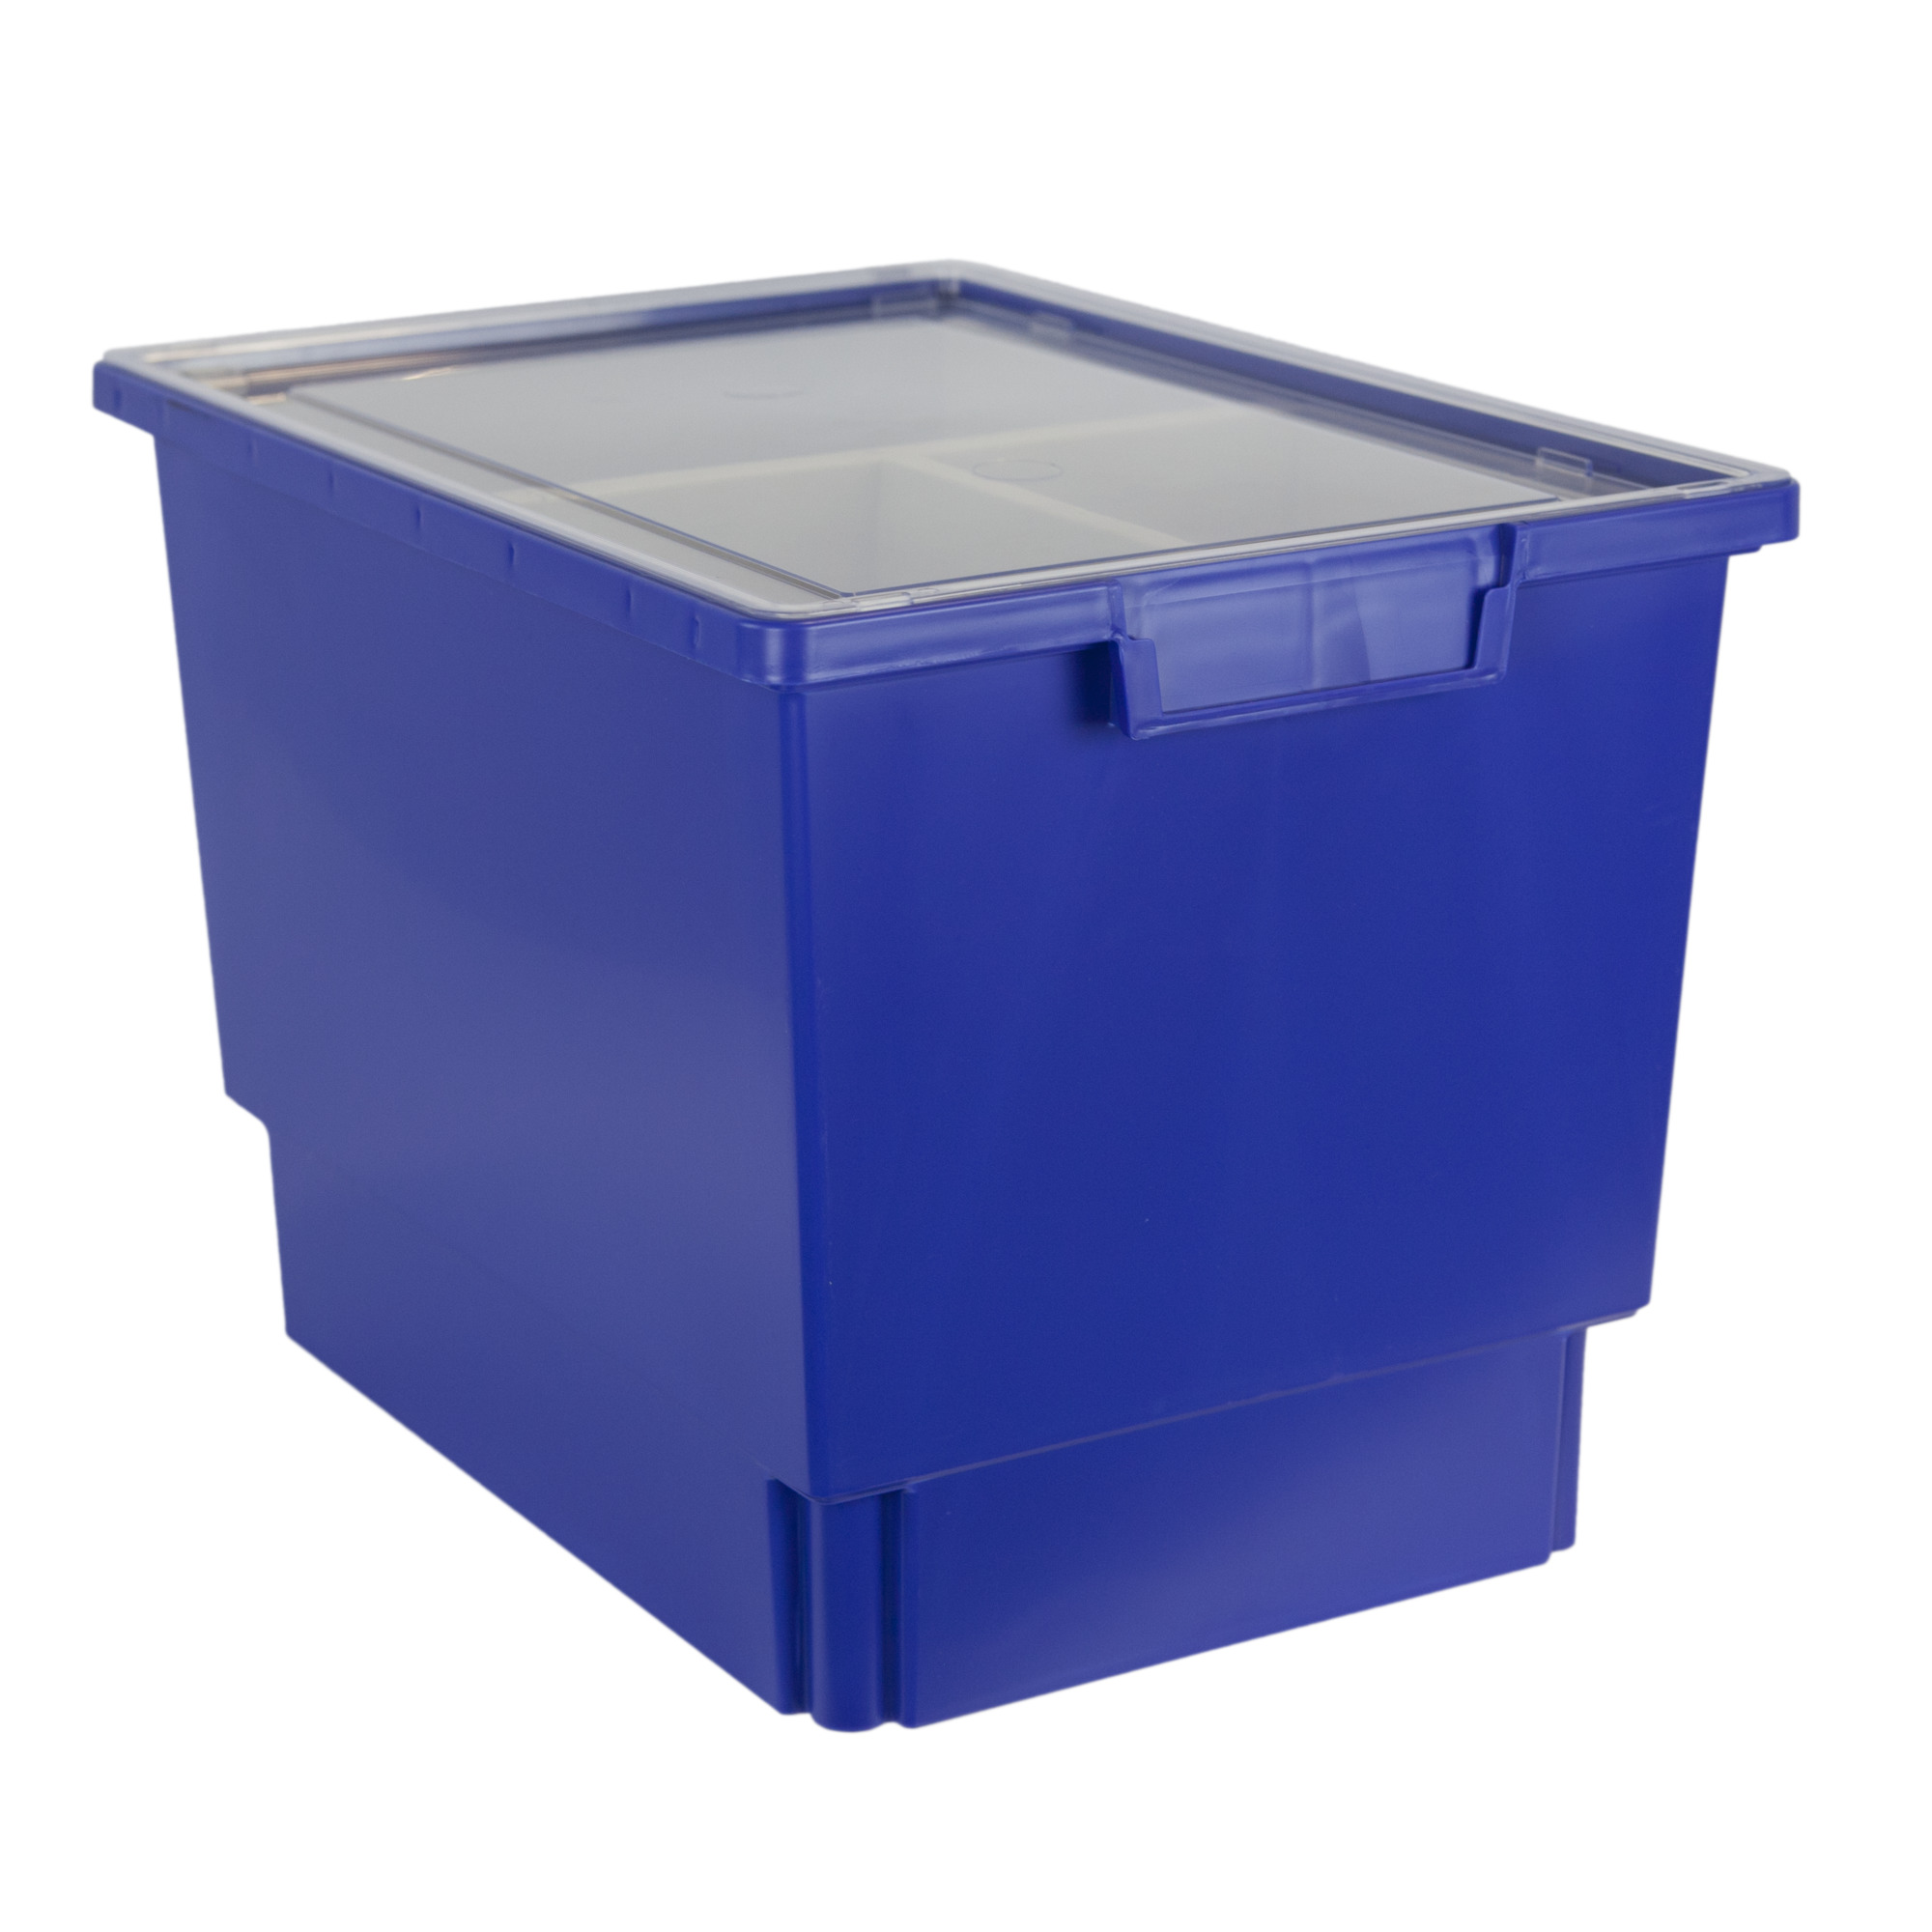 Certwood StorWerks, Slim Line 12Inch Tray Kit (3 x Divisions) Blue, Included (qty.) 1, Material Plastic, Height 12 in, Model CE1954PB-NK0004-1